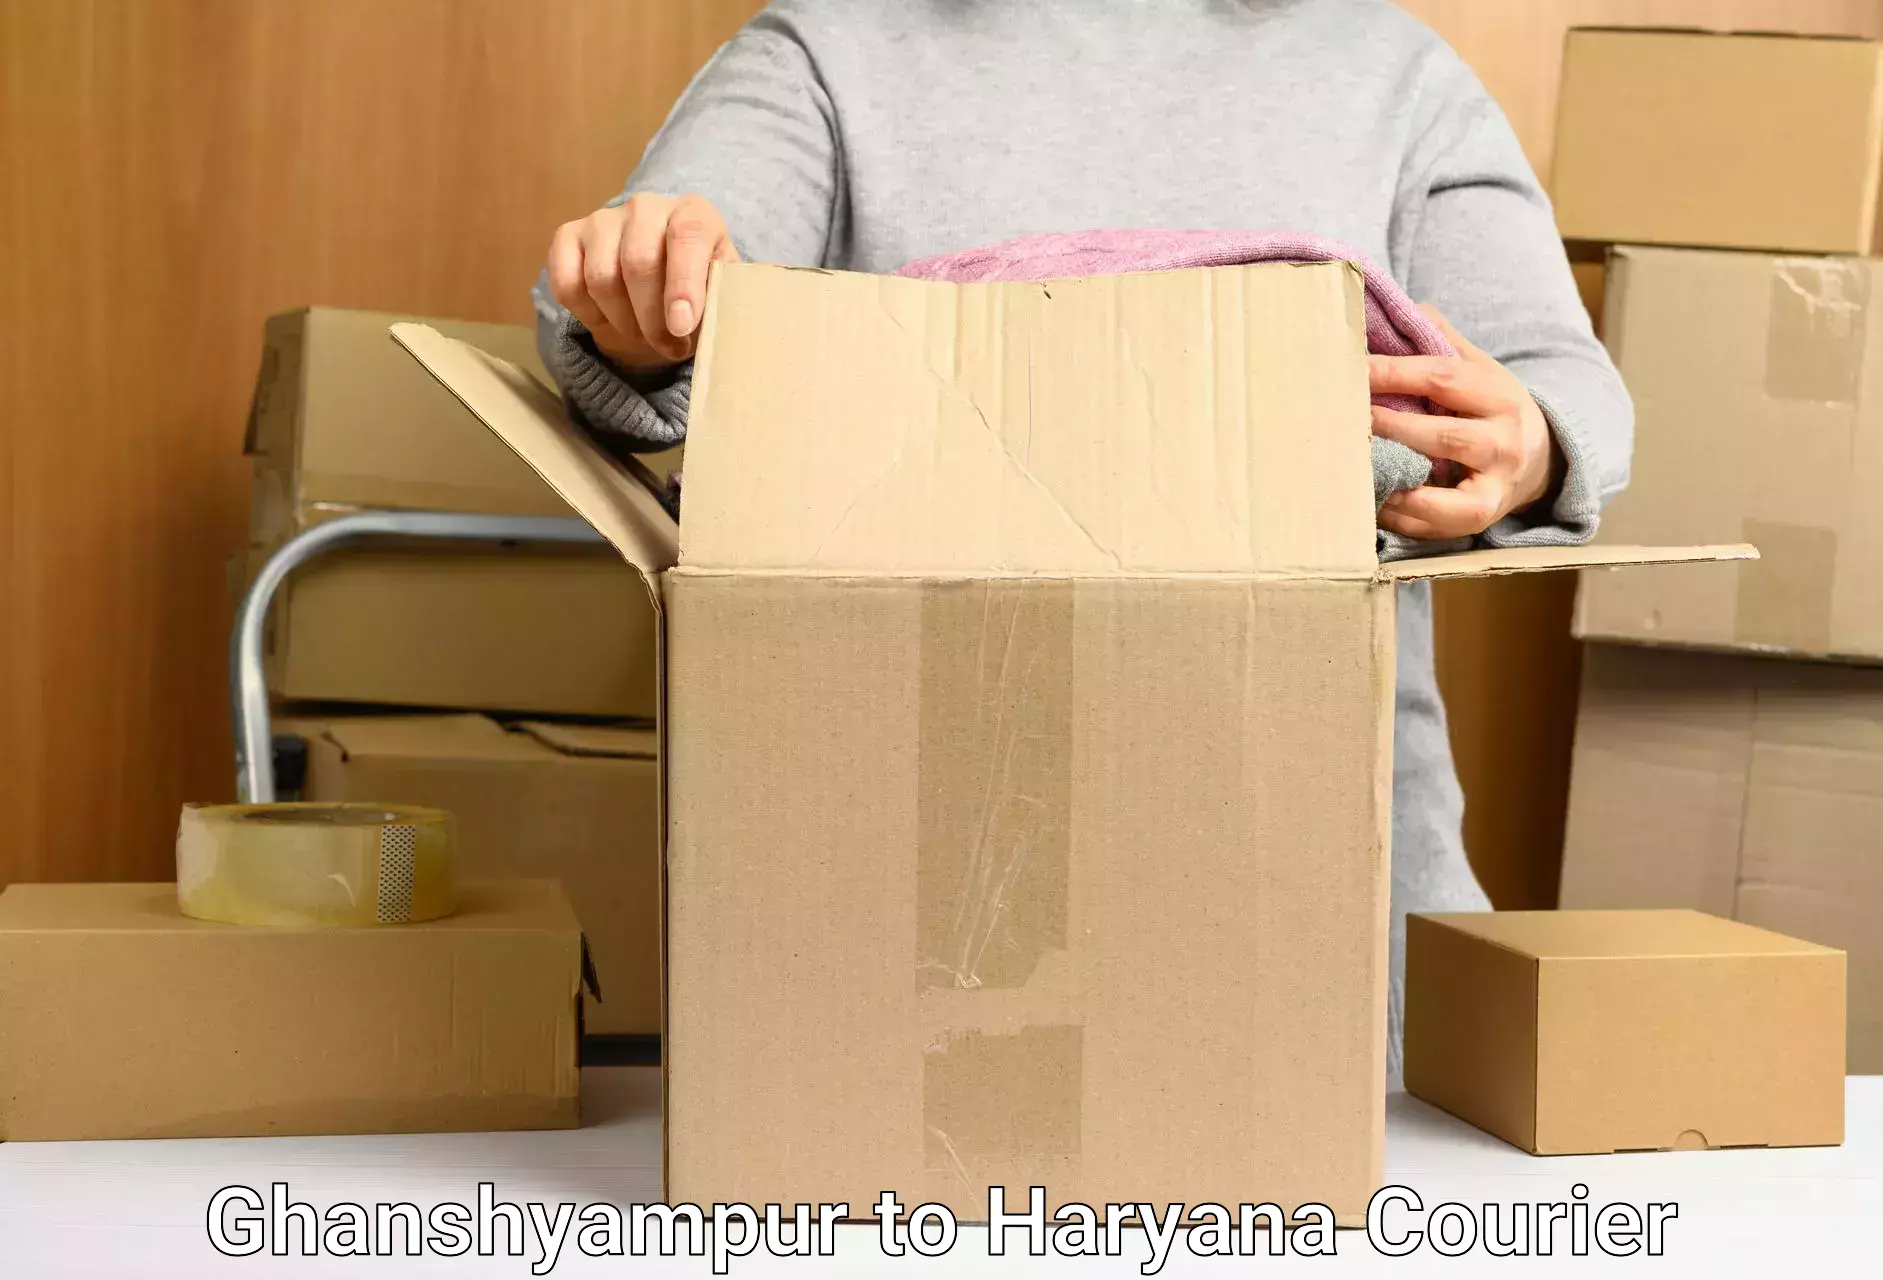 Full-service courier options Ghanshyampur to Haryana